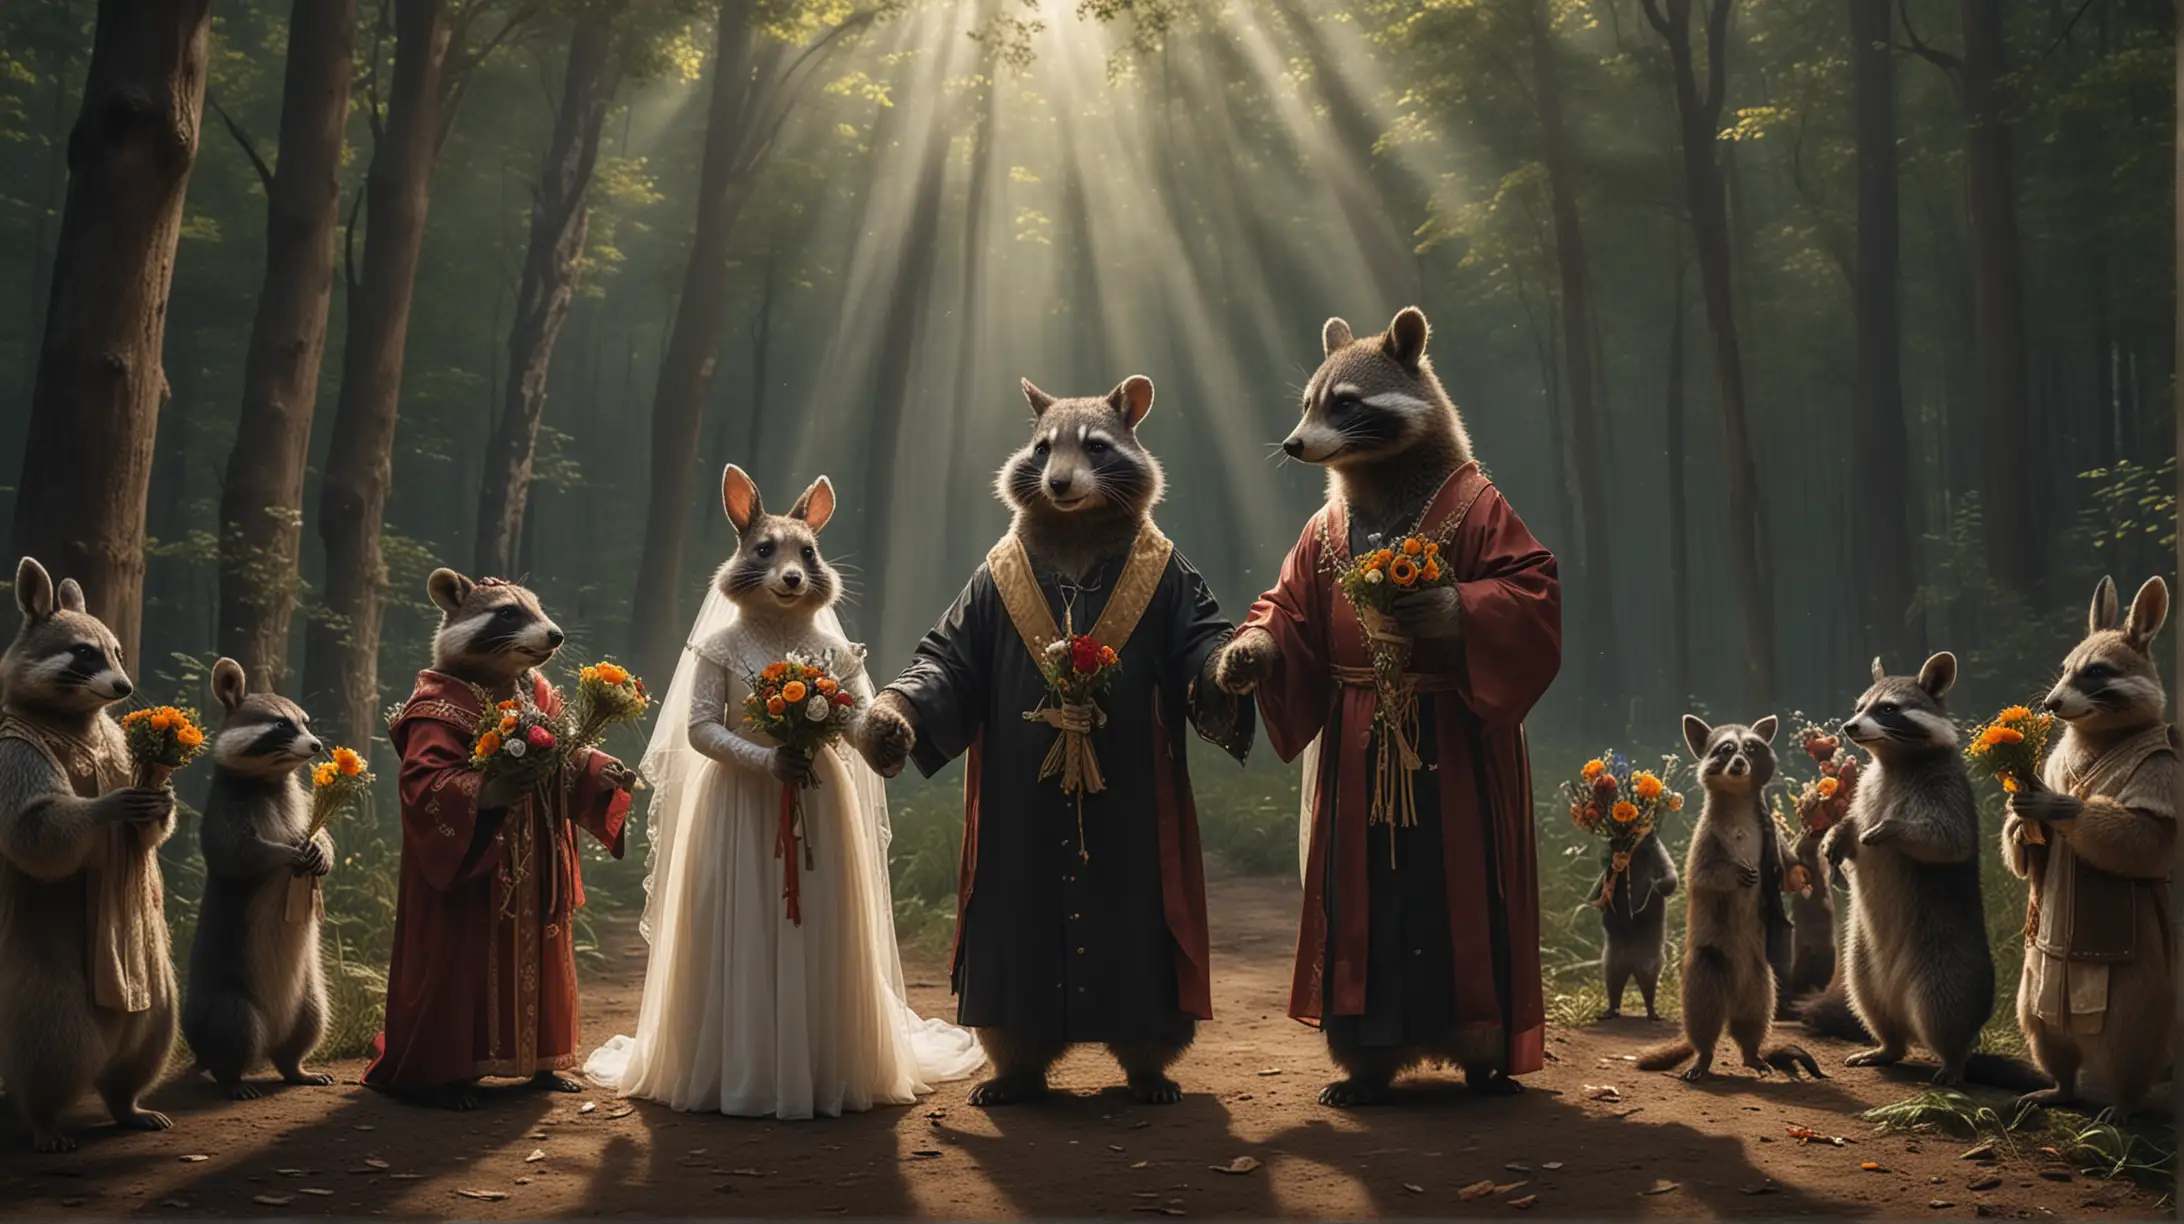 A wedding ceremony in the forest, a rabbit and a raccoon are getting married, they are holding hands, a bear wearing a priest's clothing is the minister,  dramatic light, various animals in attendance, some are holding bouquets.